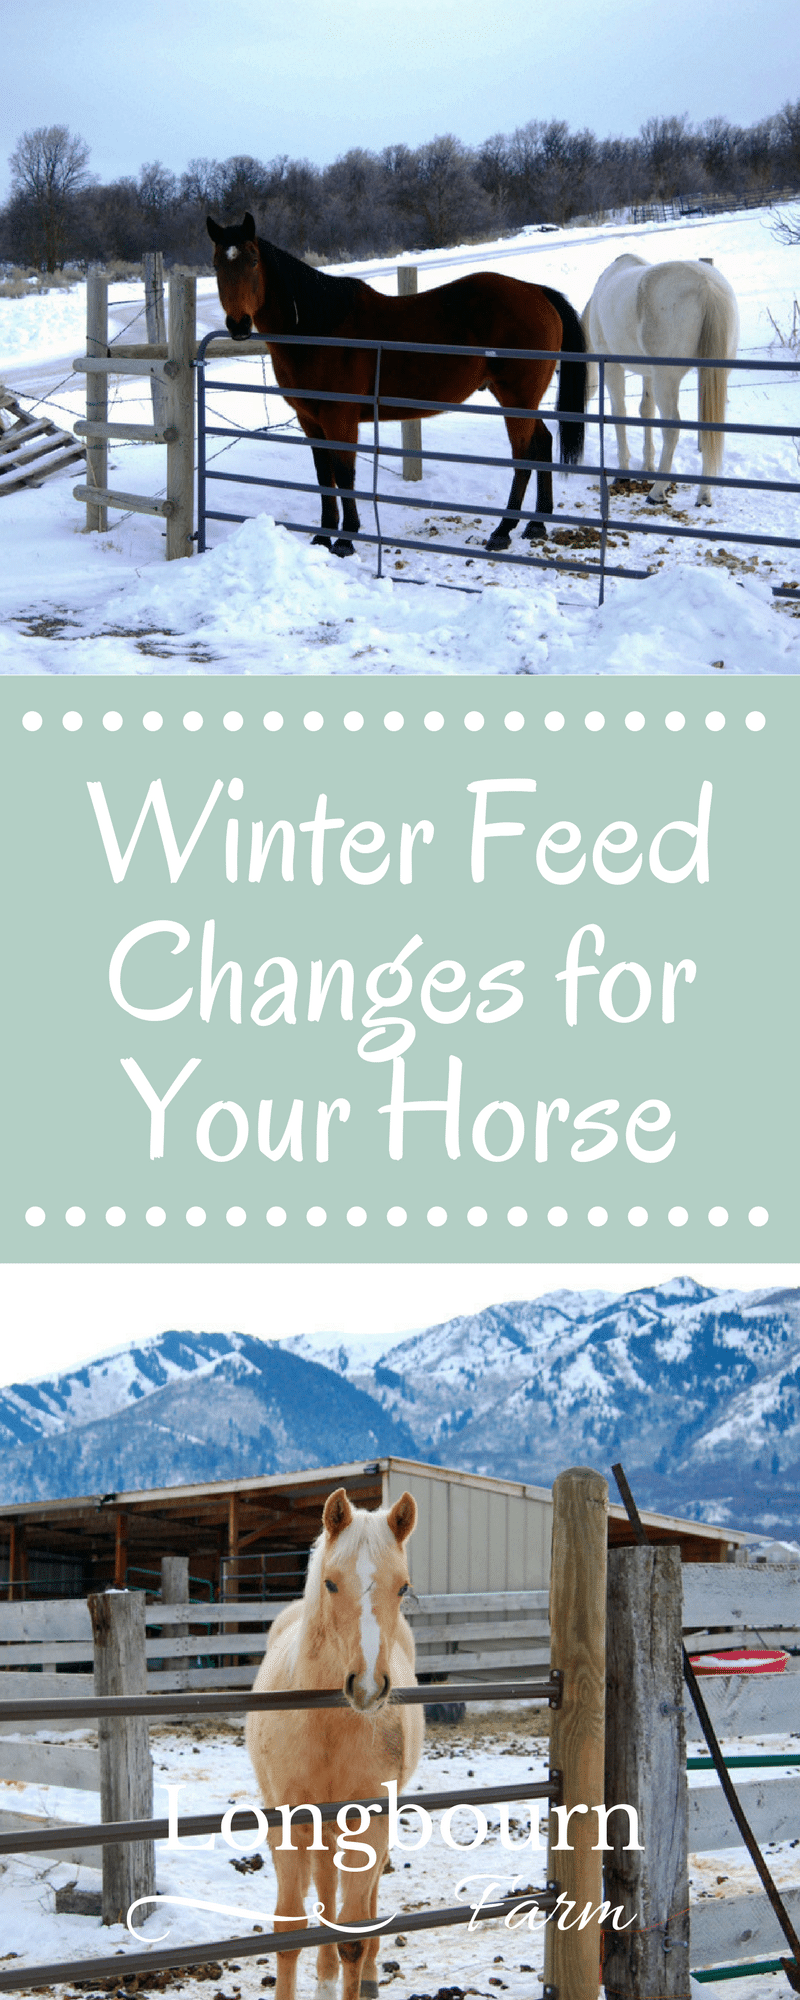 Diet changes for feeding horses in winter don't have to be huge or difficult, often small changes will set your horse up for success in the cold weather.